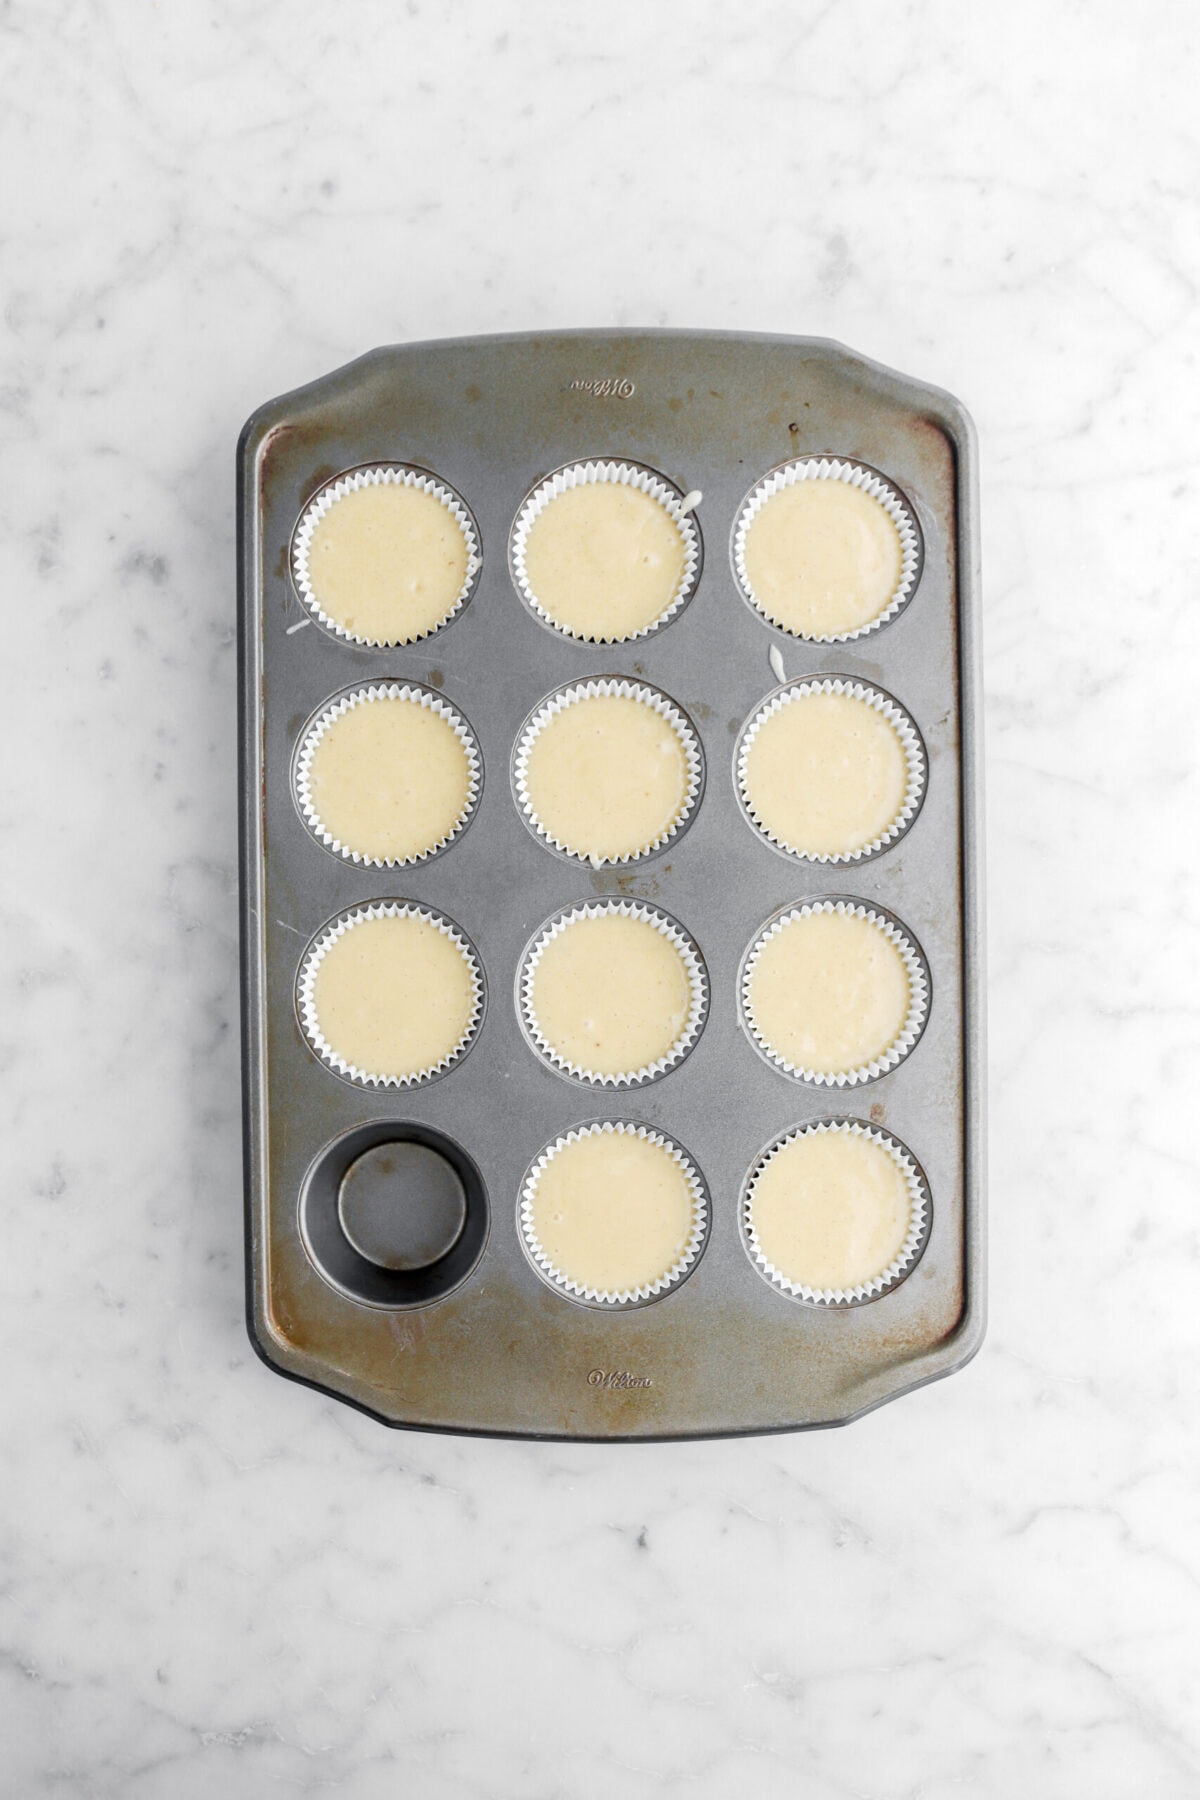 11 unbaked cupcakes in muffin pan.